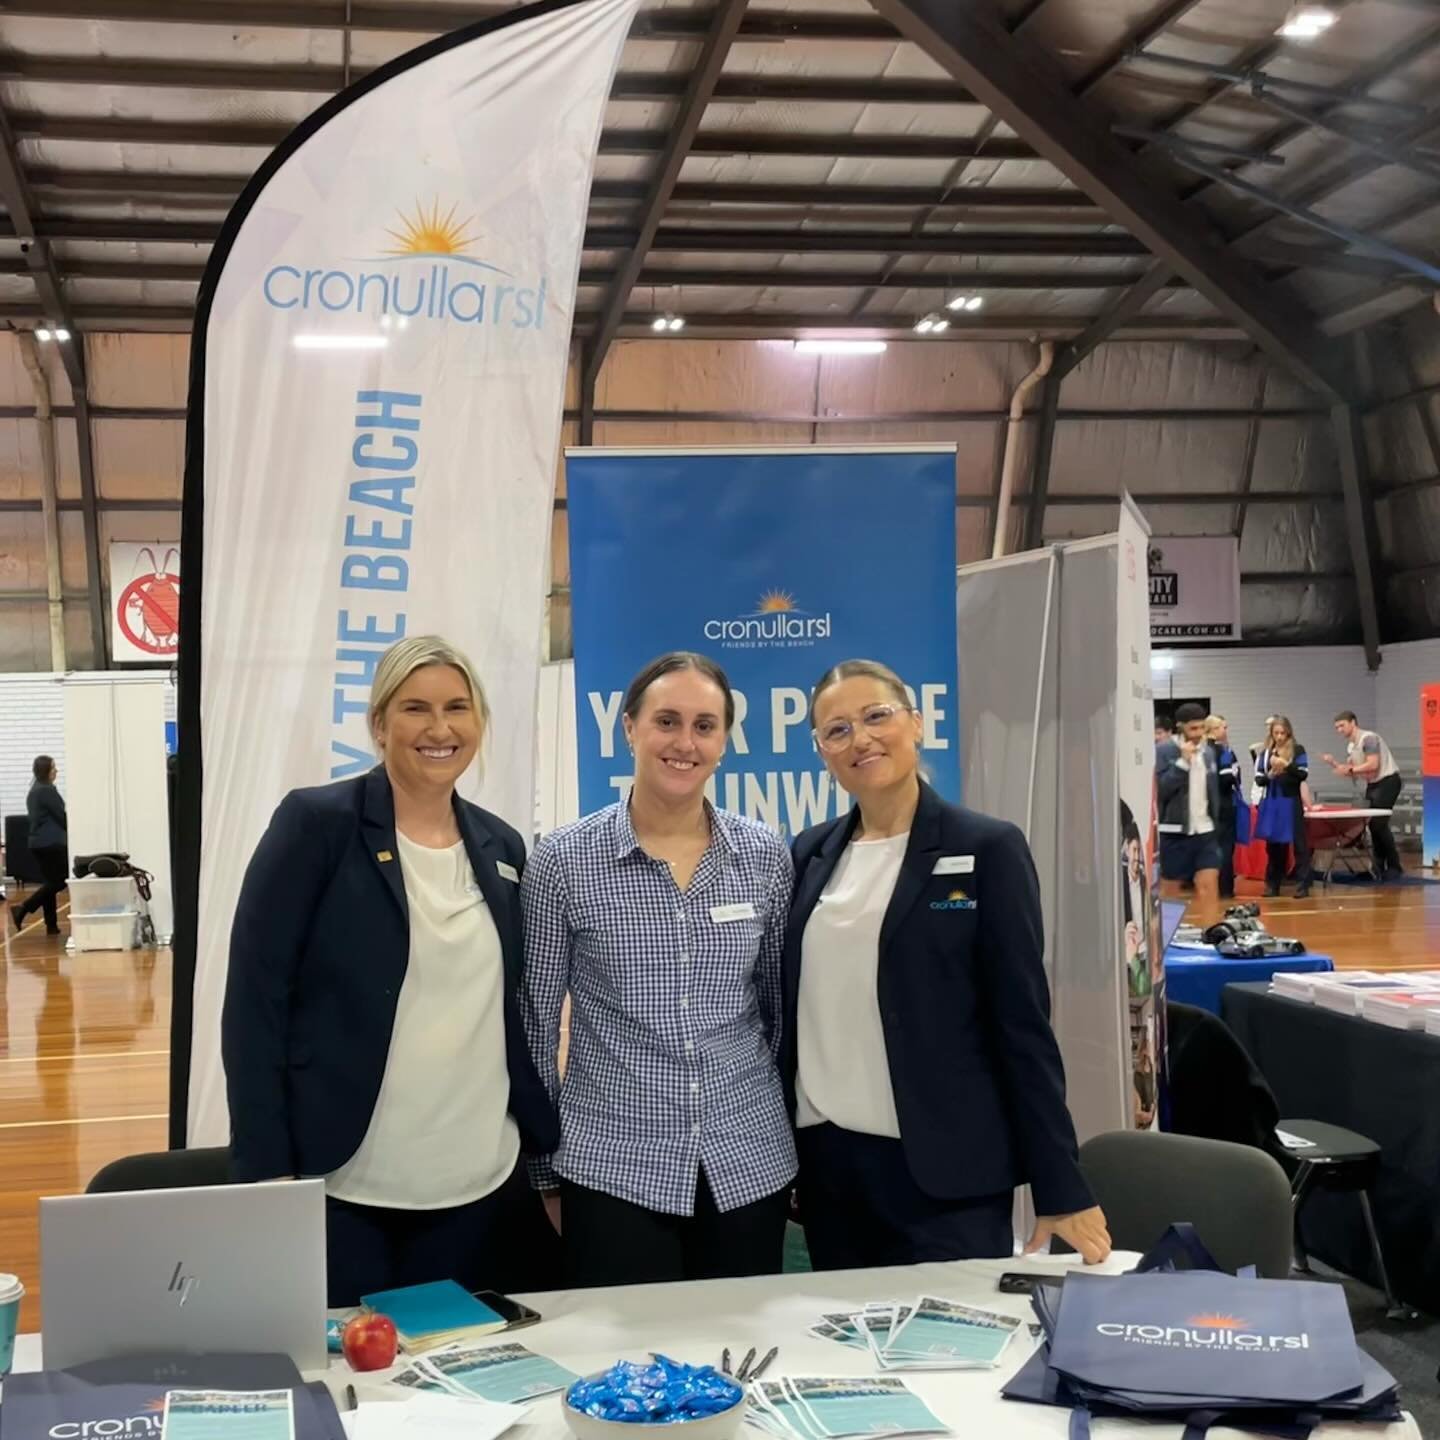 ✨ the @cronullarsl team attended the Sutherland Shire Career Expo today ✨

💙💛 The Sutherland Basketball Stadium was buzzing with activity, as Year 12 students from local government, catholic, and independent schools were provided the opportunity to